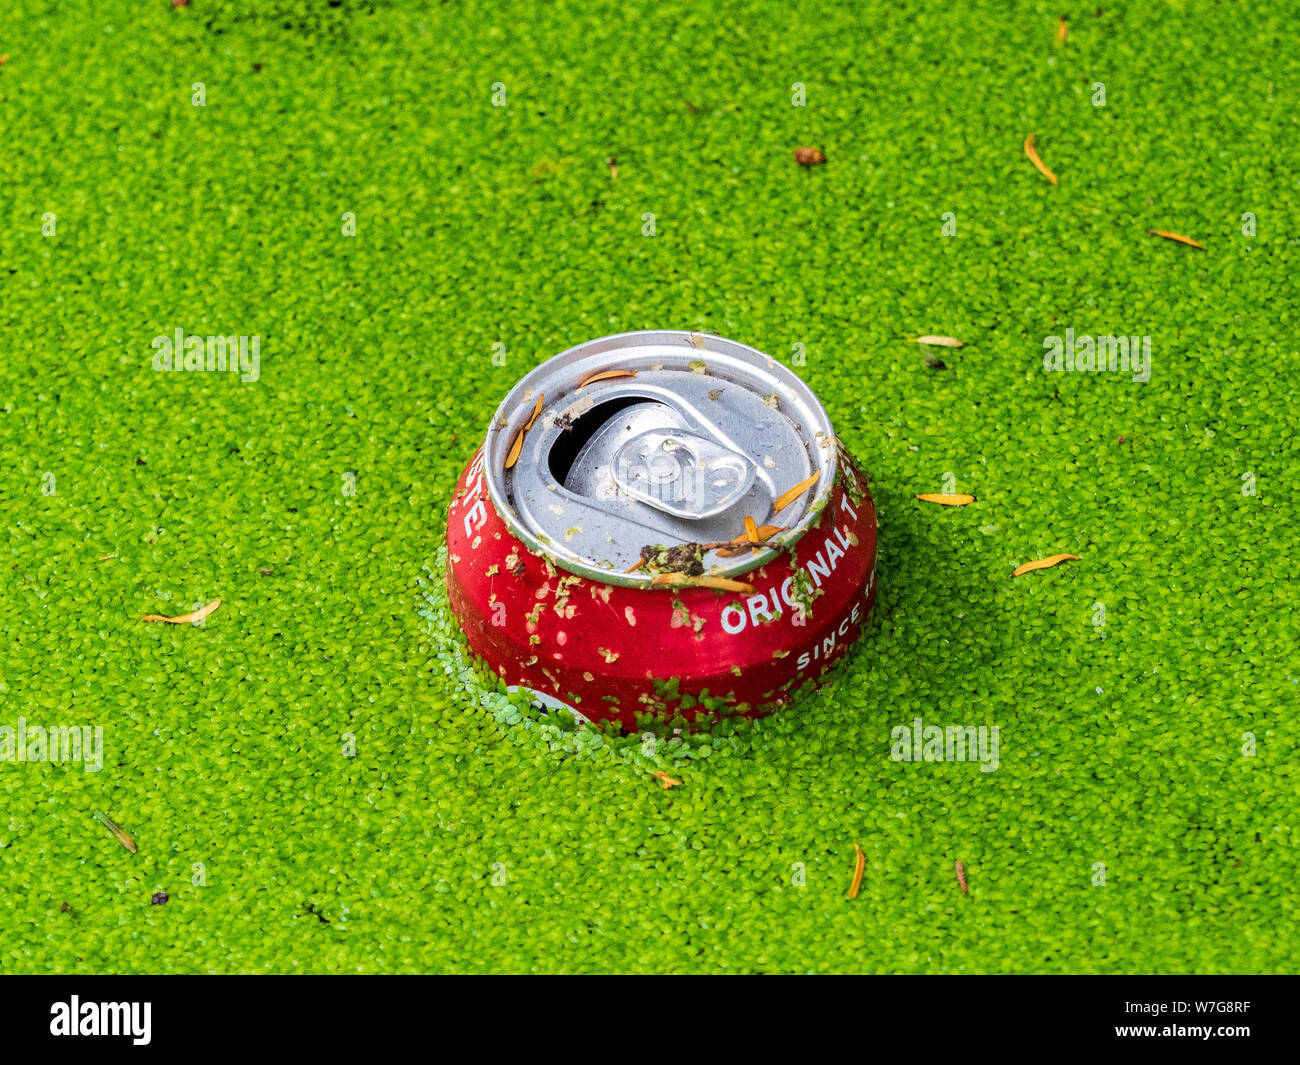 River Rubbish. Duckweed and discarded Coca Cola drinks in a river. Drinks can floating on a river covered in Duckweed Stock Photo